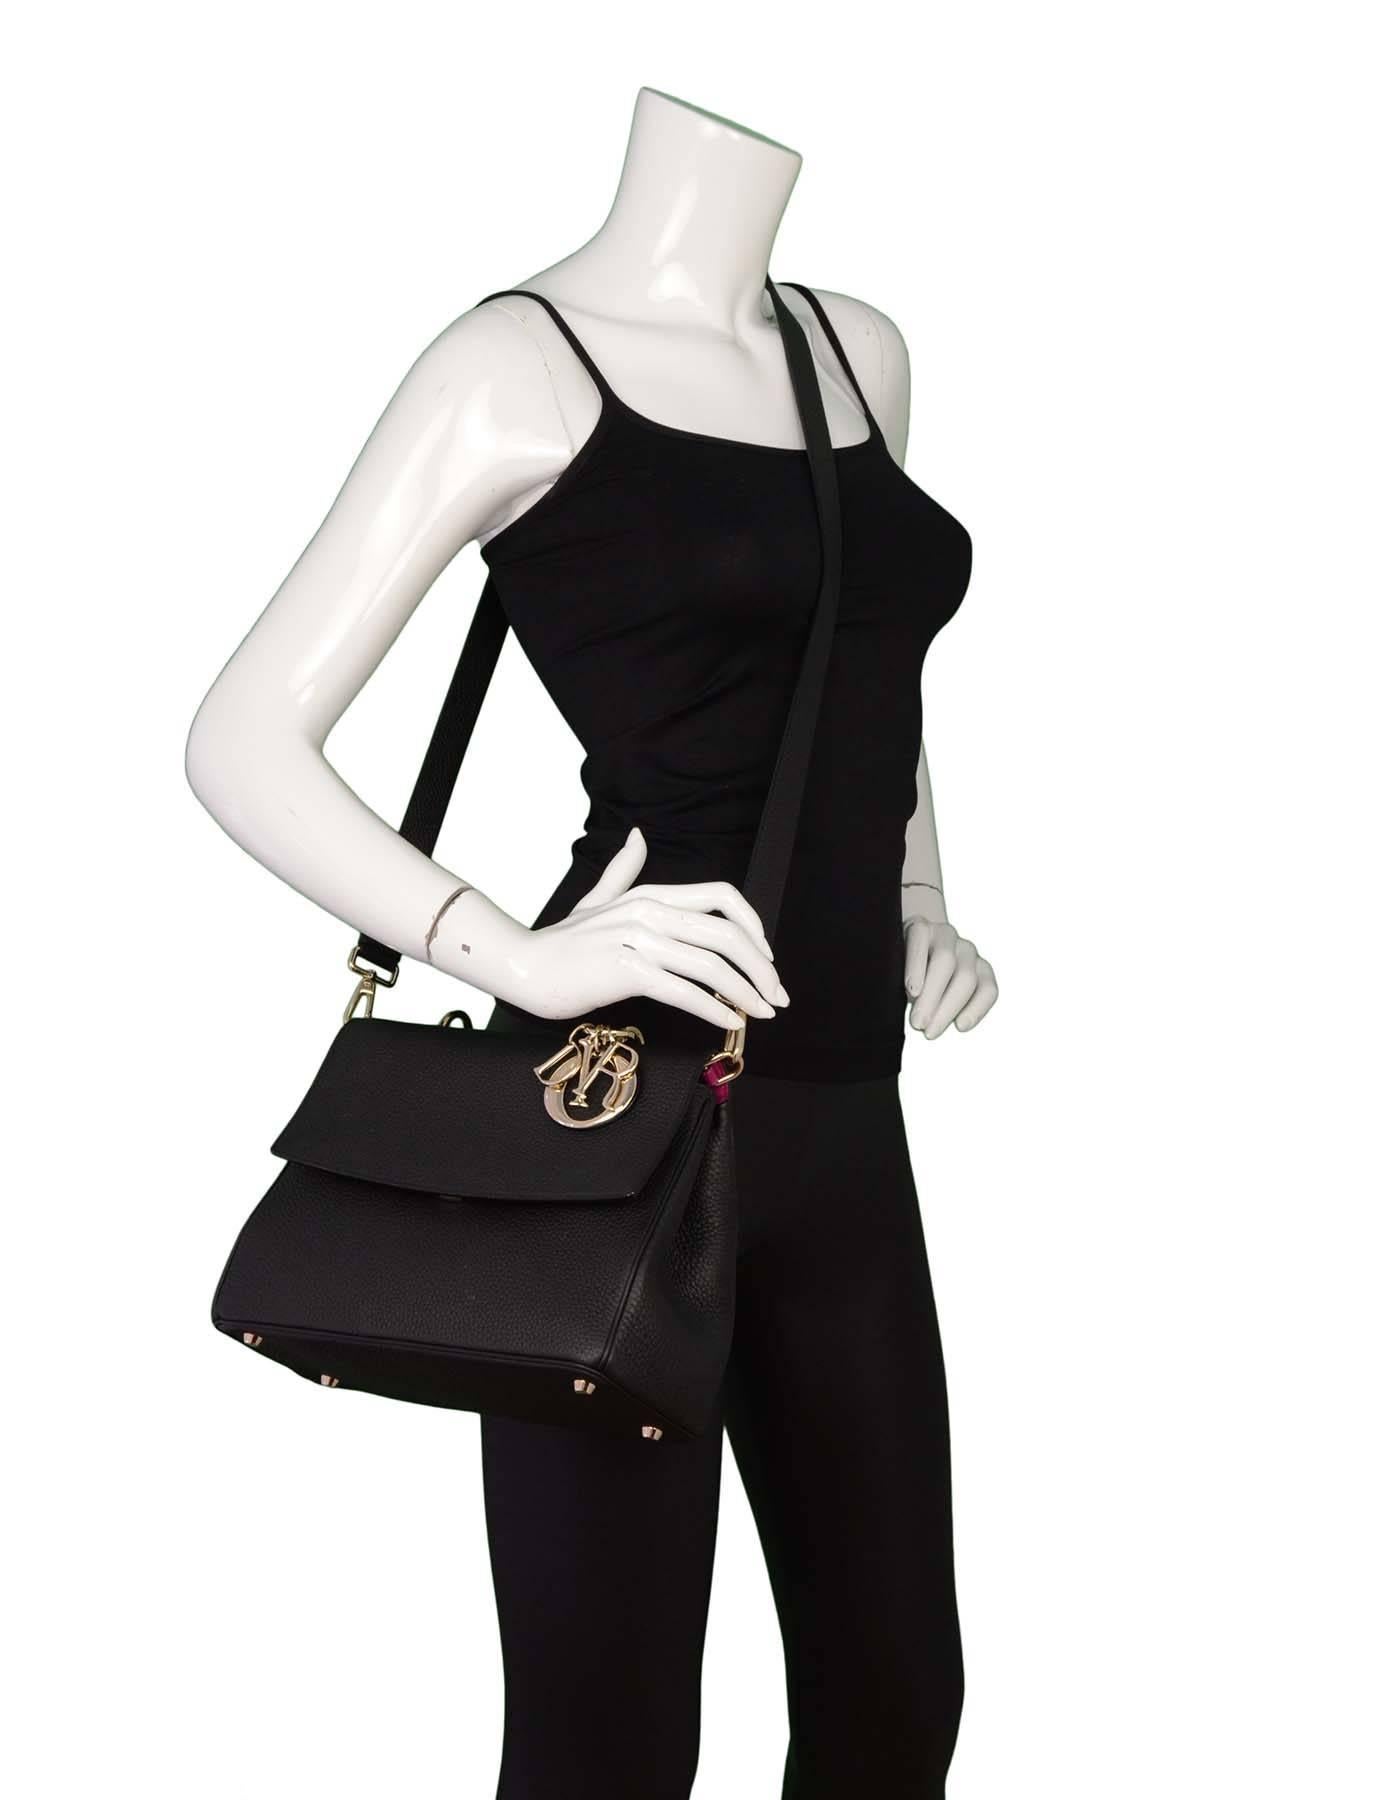 Christian Dior Black Leather Small Be Dior Bag GHW rt. $4, 400 5